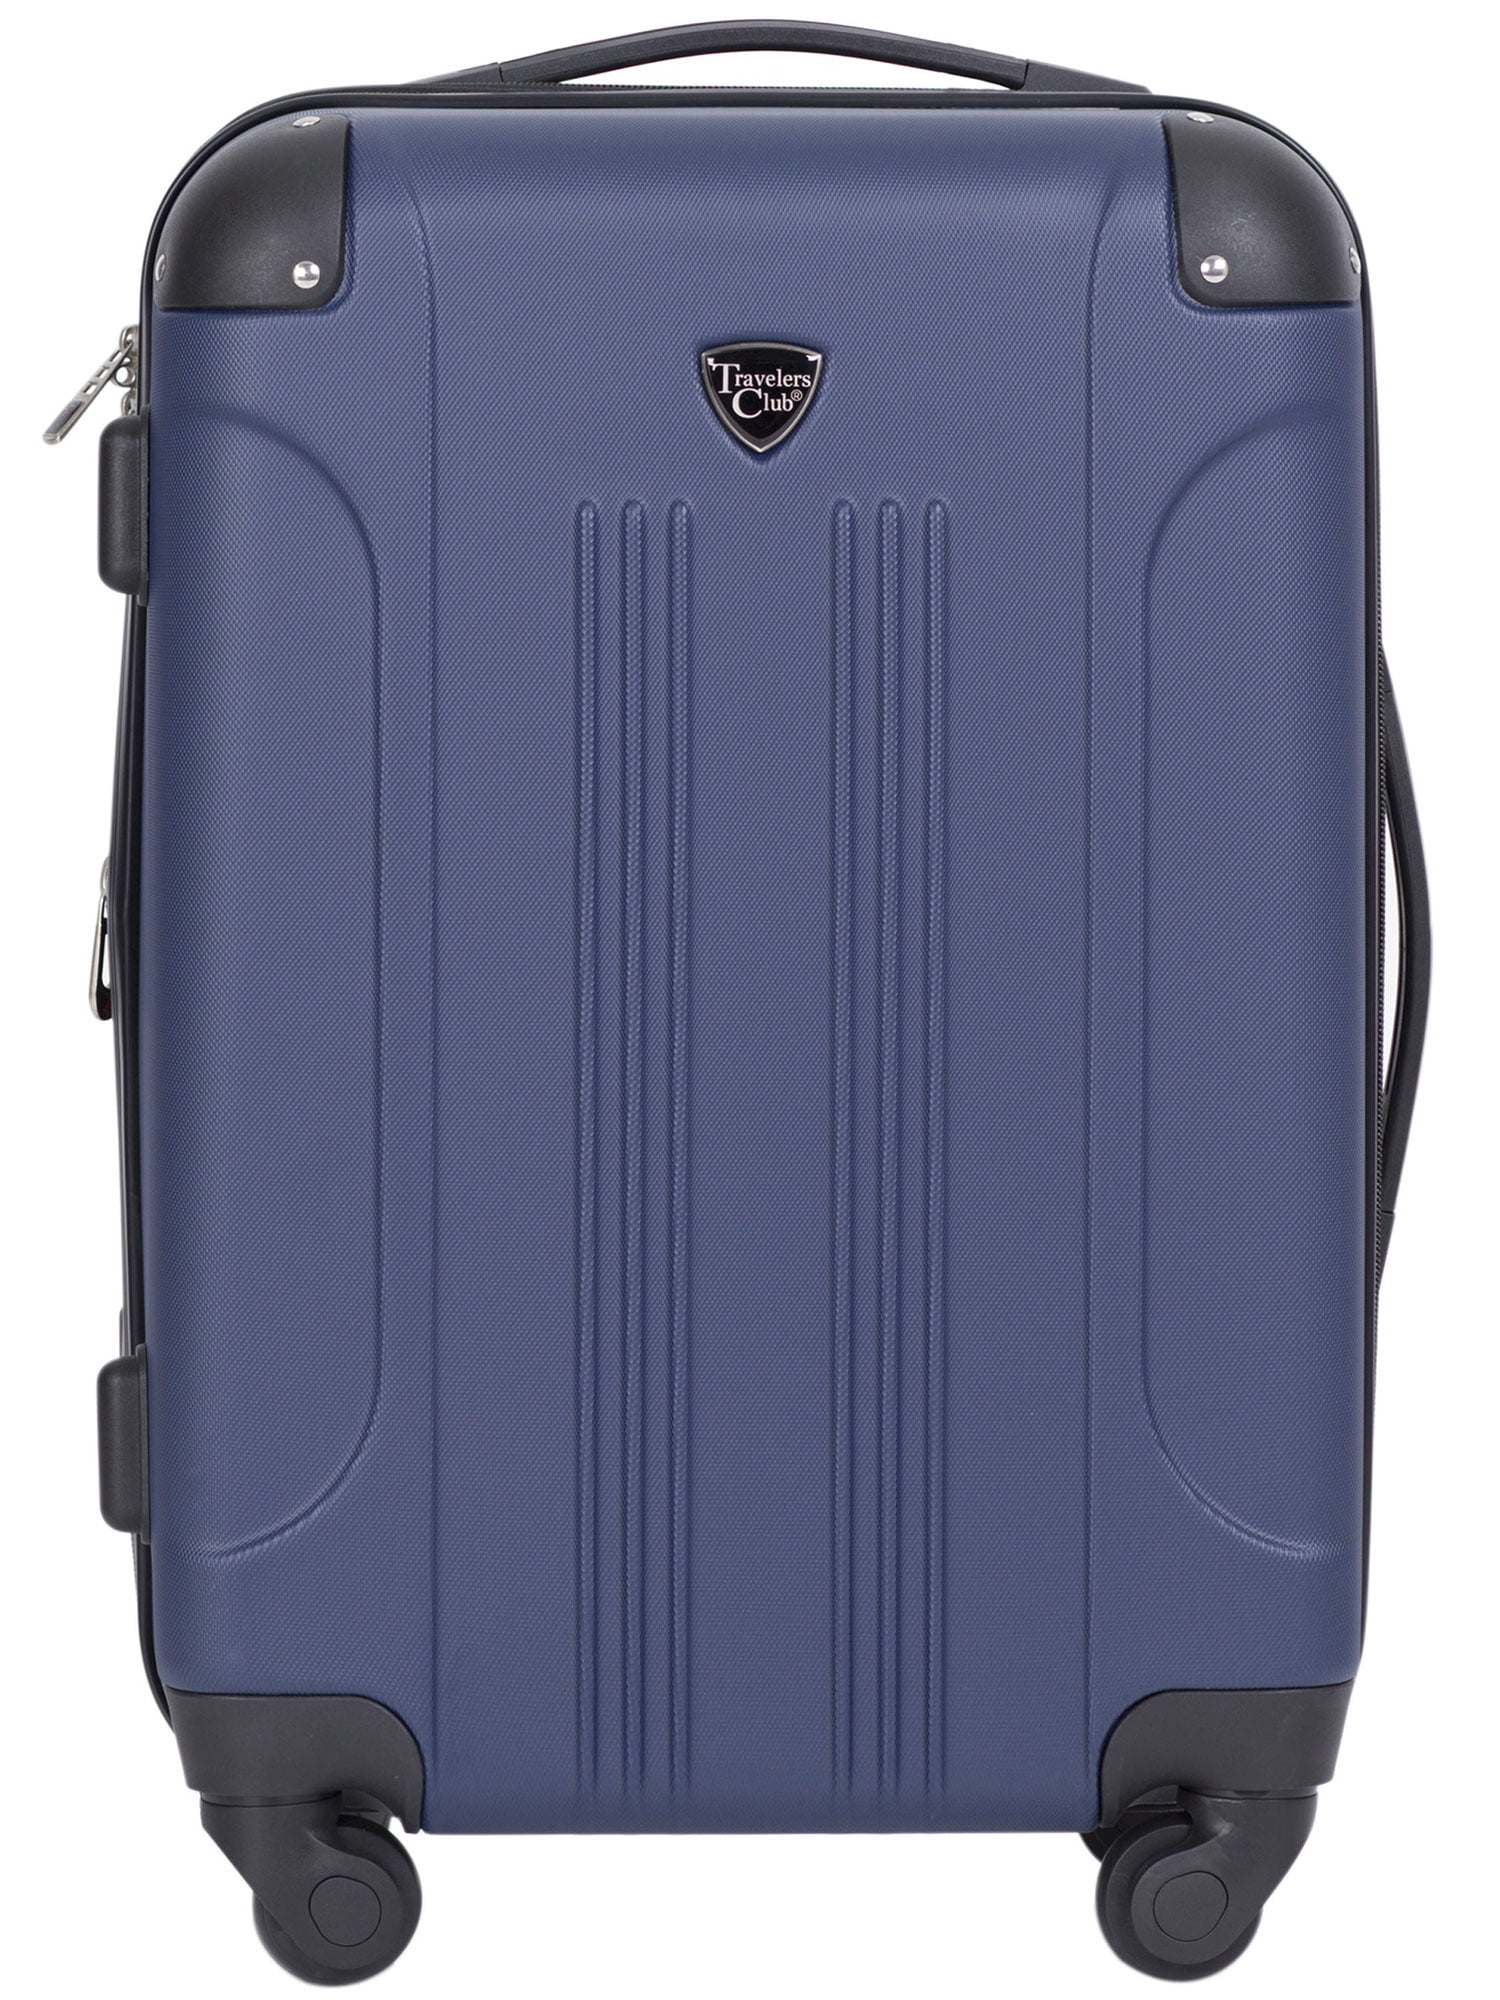 Travelers Club Chicago 20" Hardside Rolling Carry On Luggage Navy